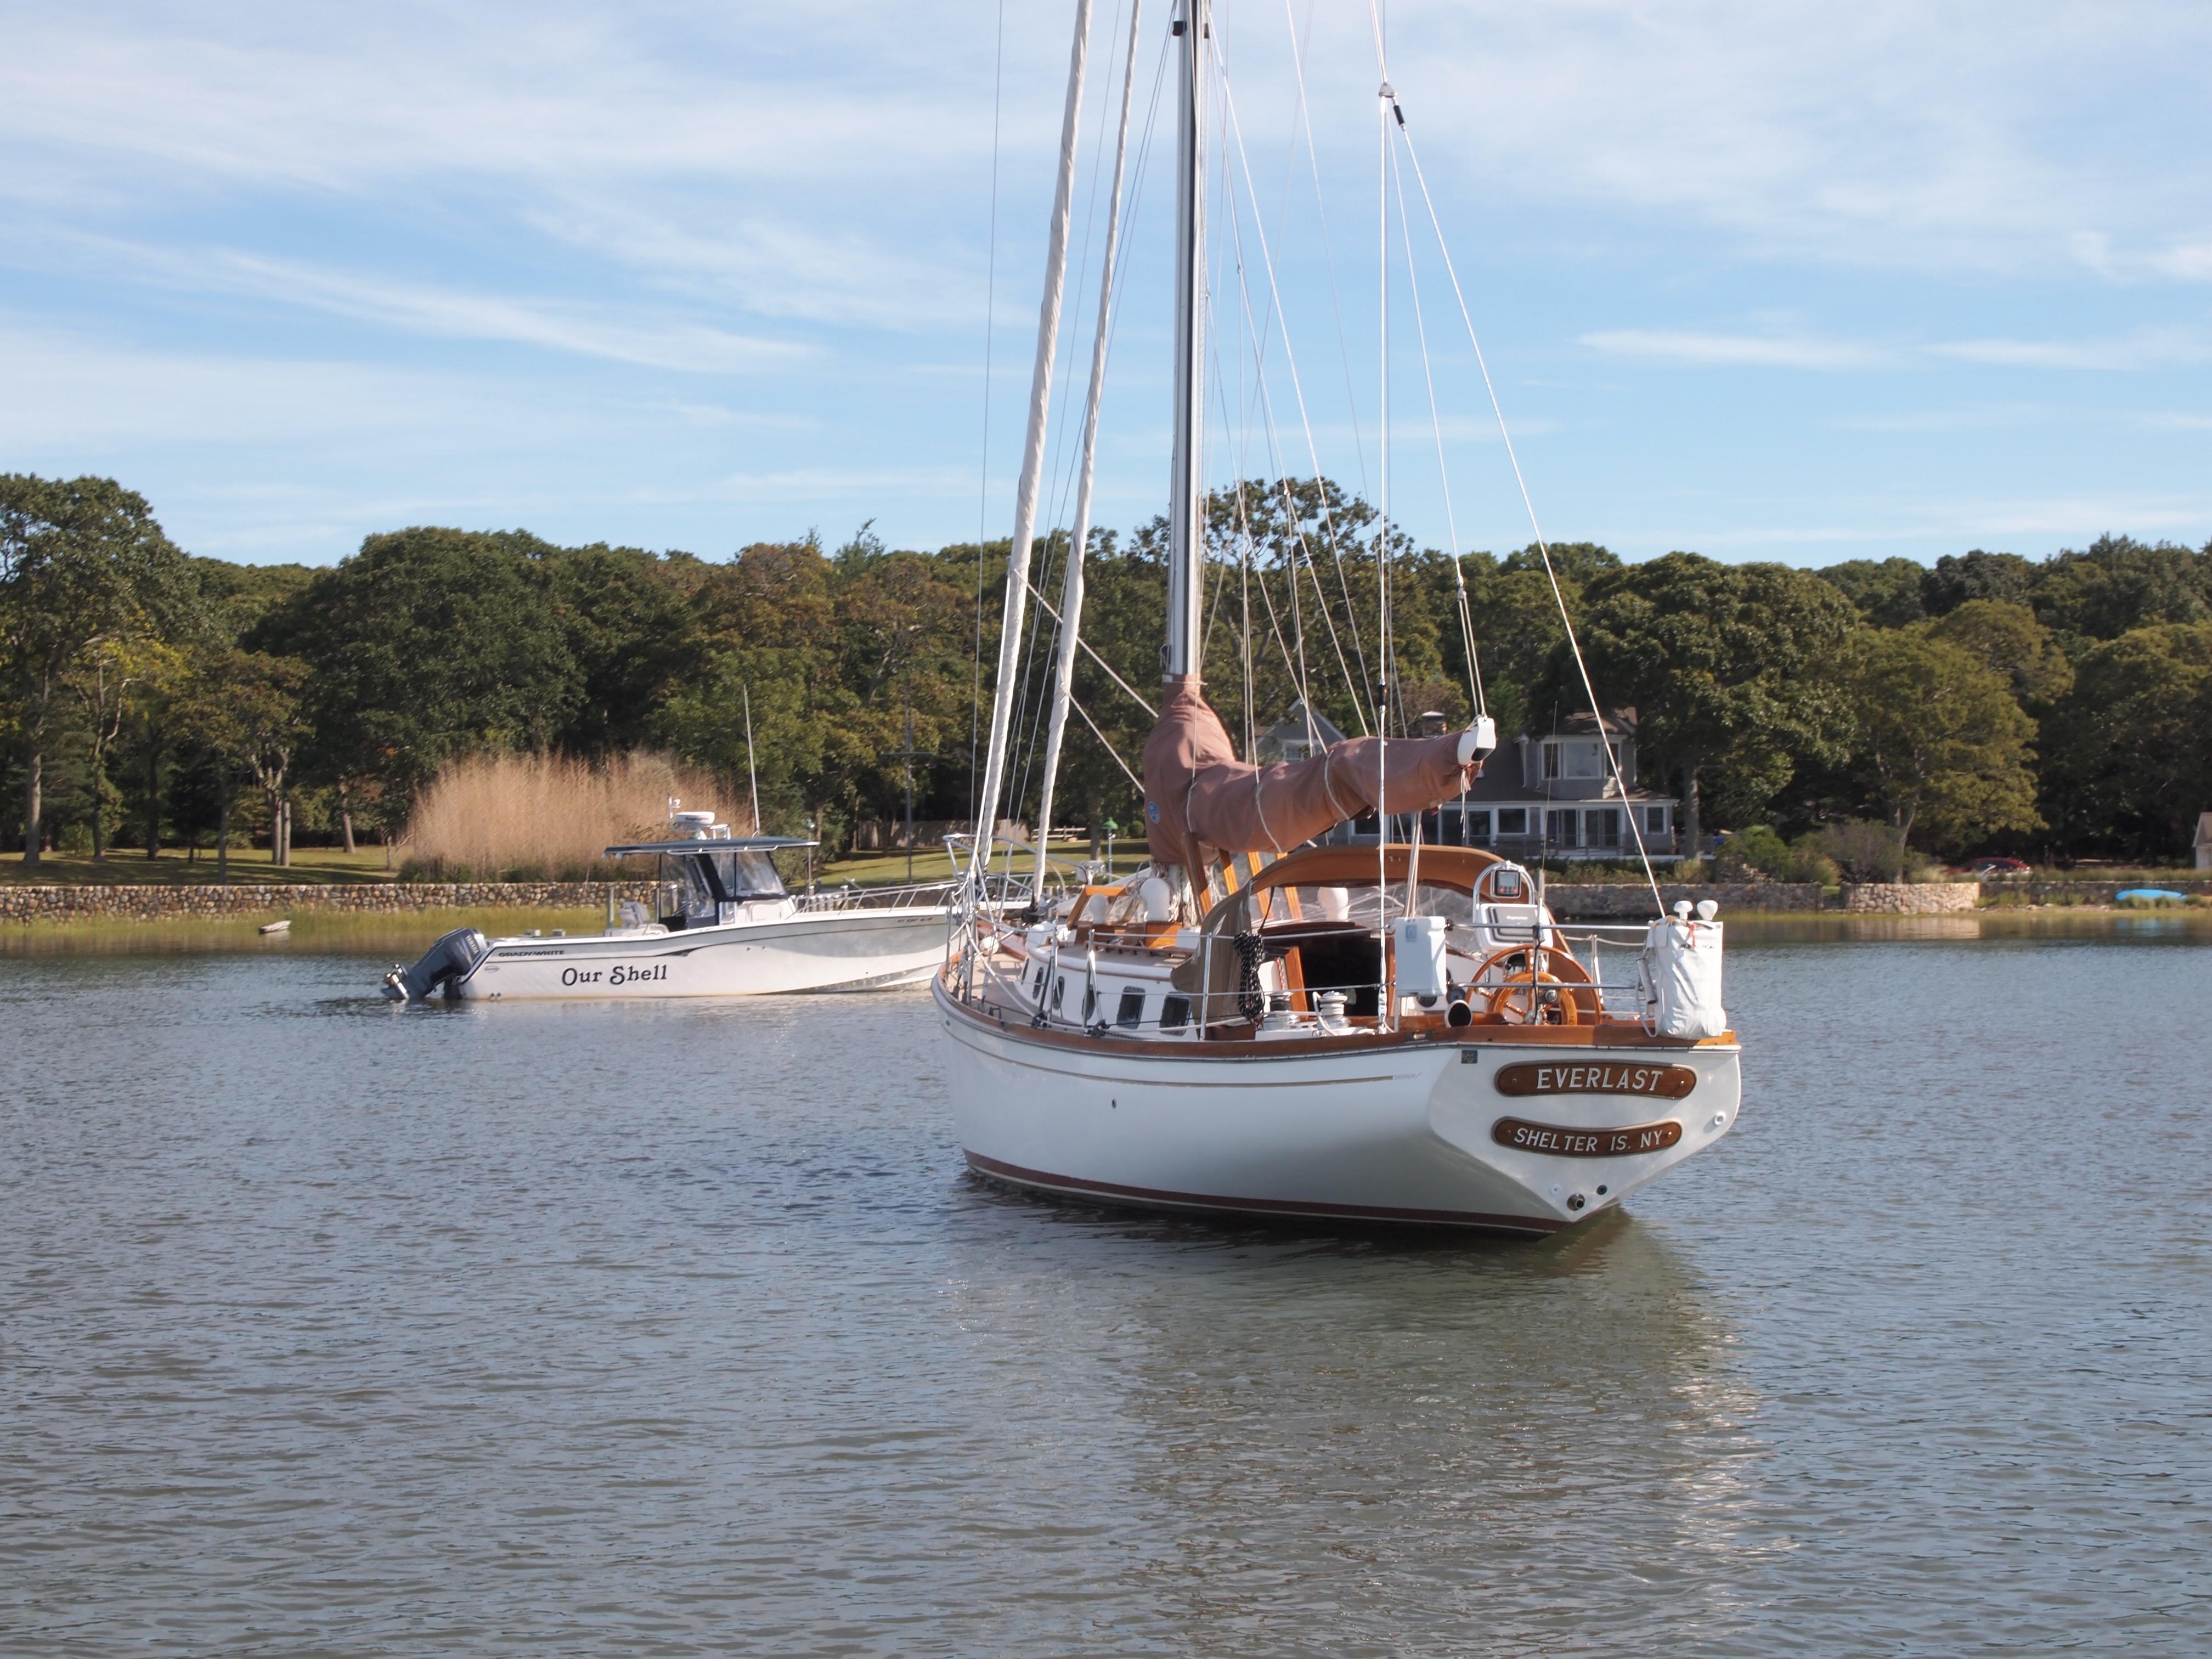 Shannon staysail Cutter, Shelter Island